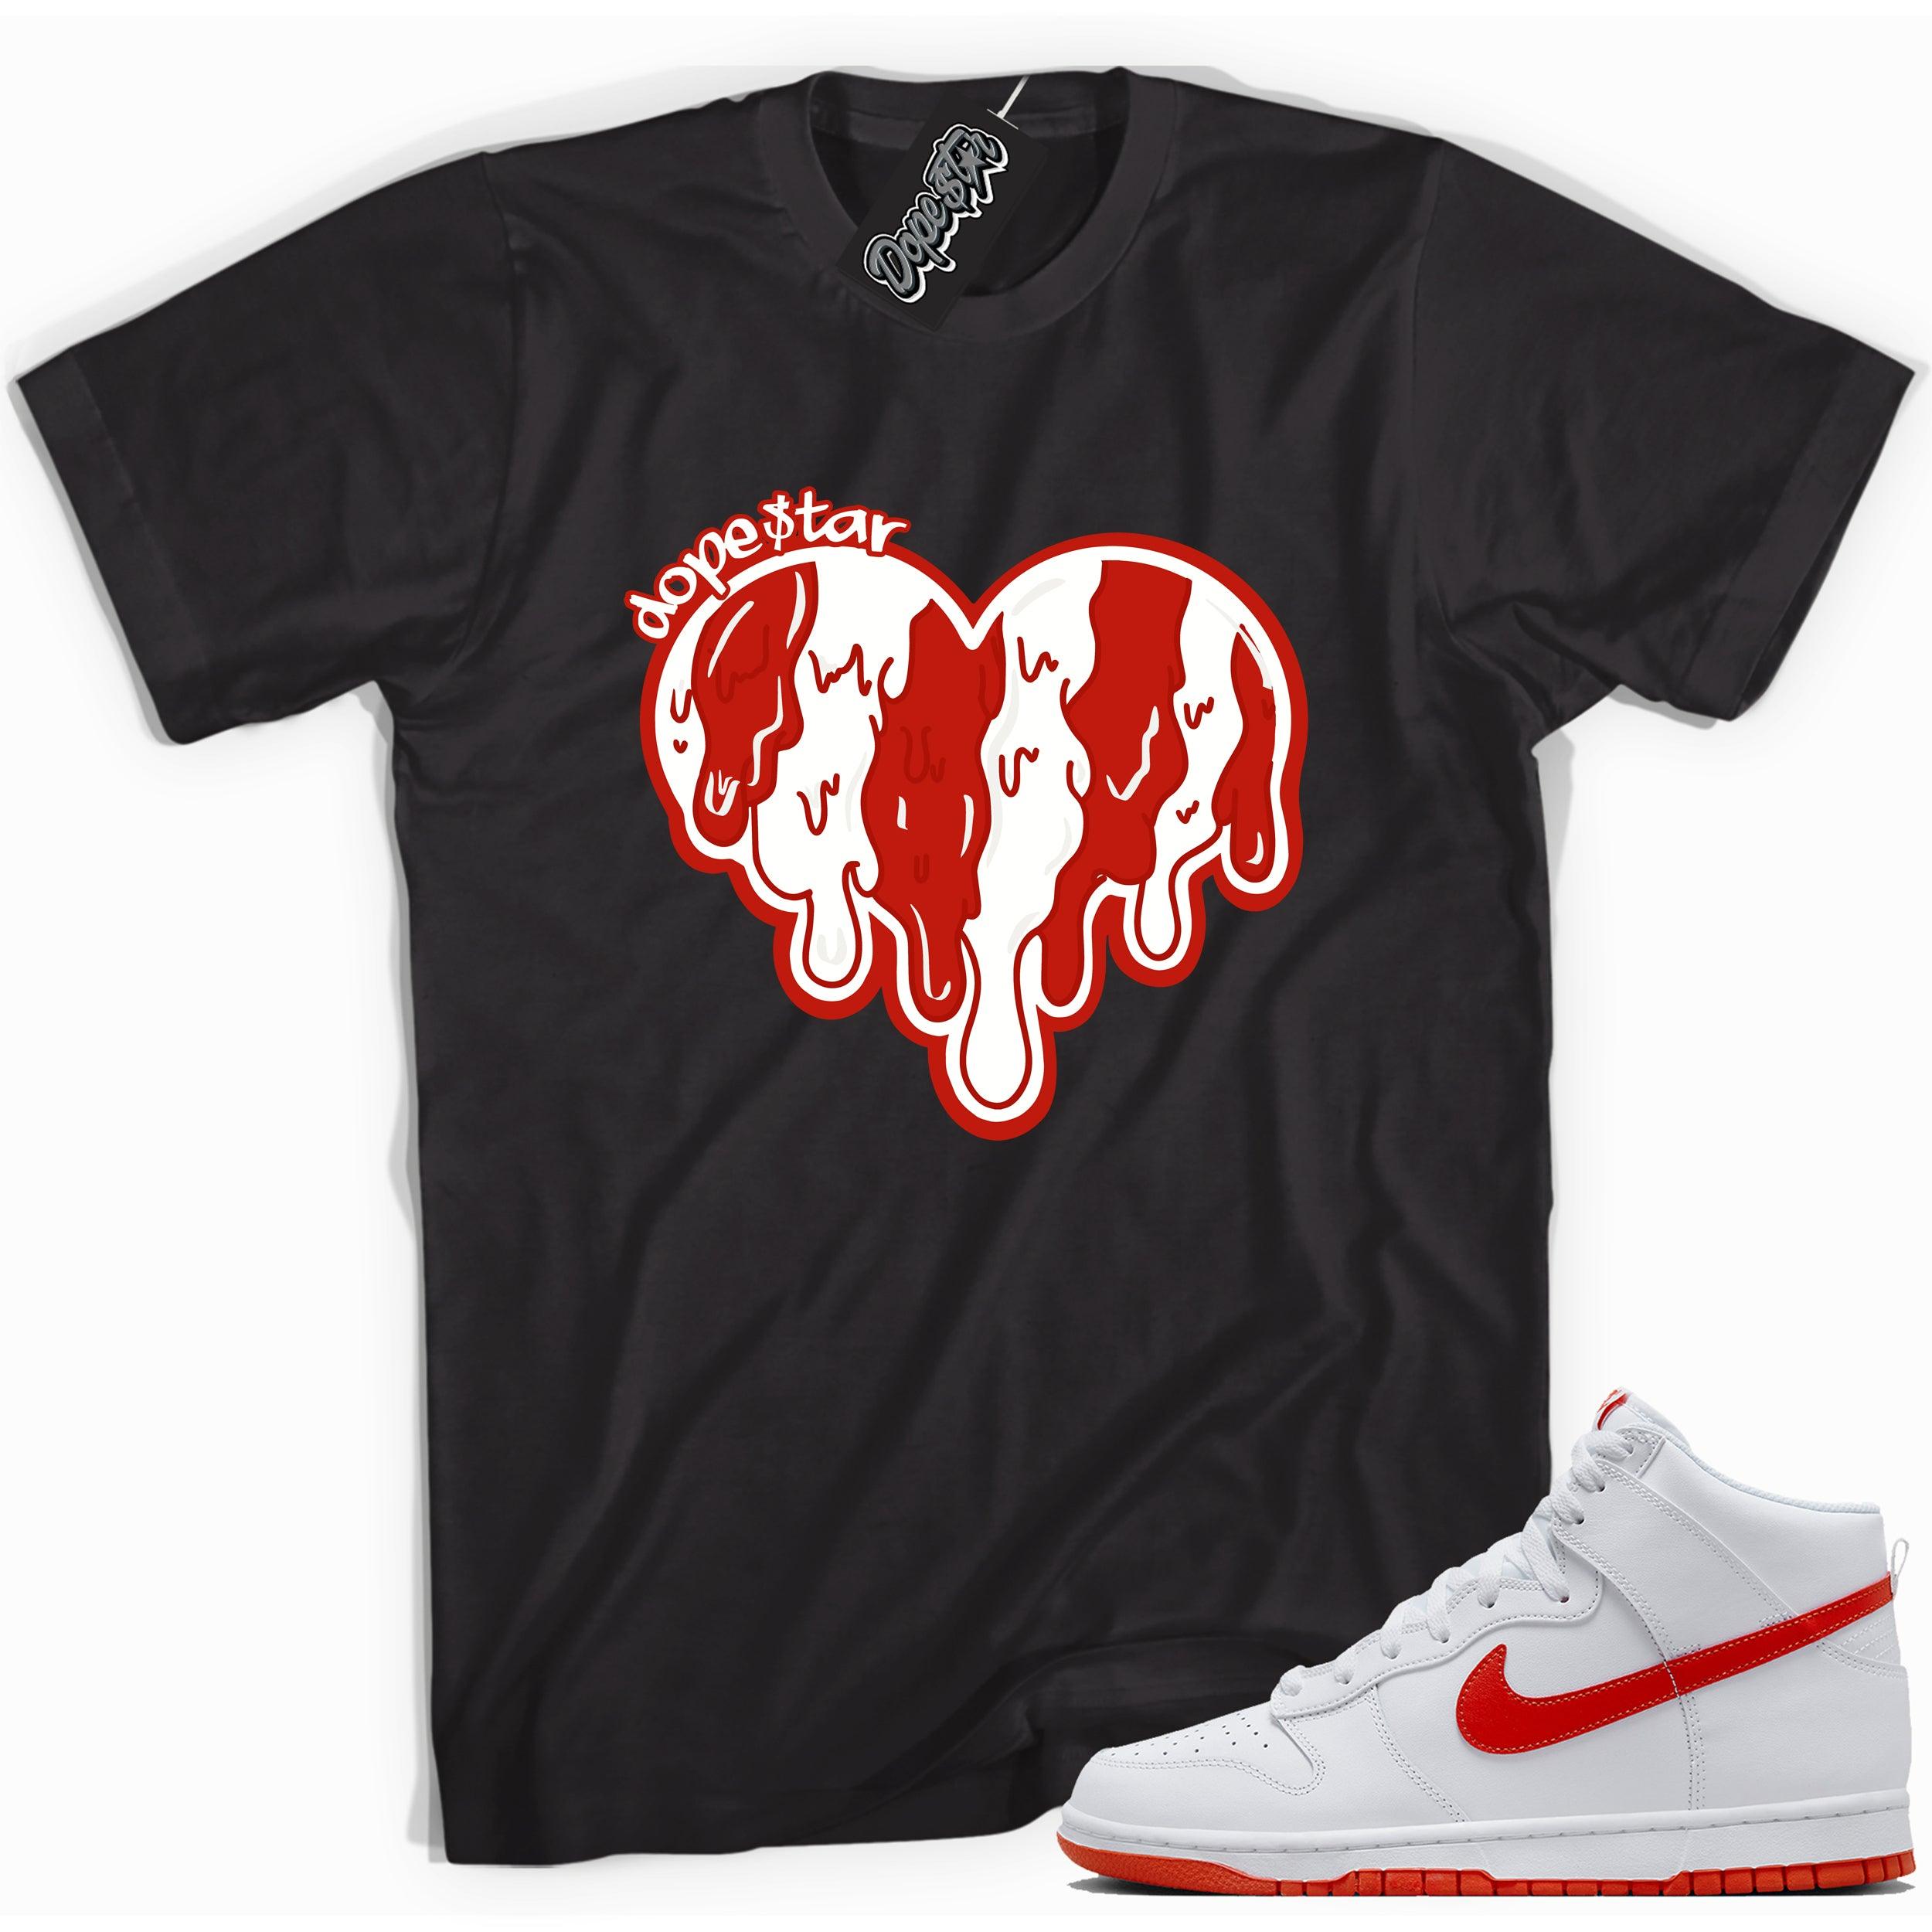 Cool black graphic tee with 'melting heart dope star' print, that perfectly matches Nike Dunk High White Picante Red sneakers.